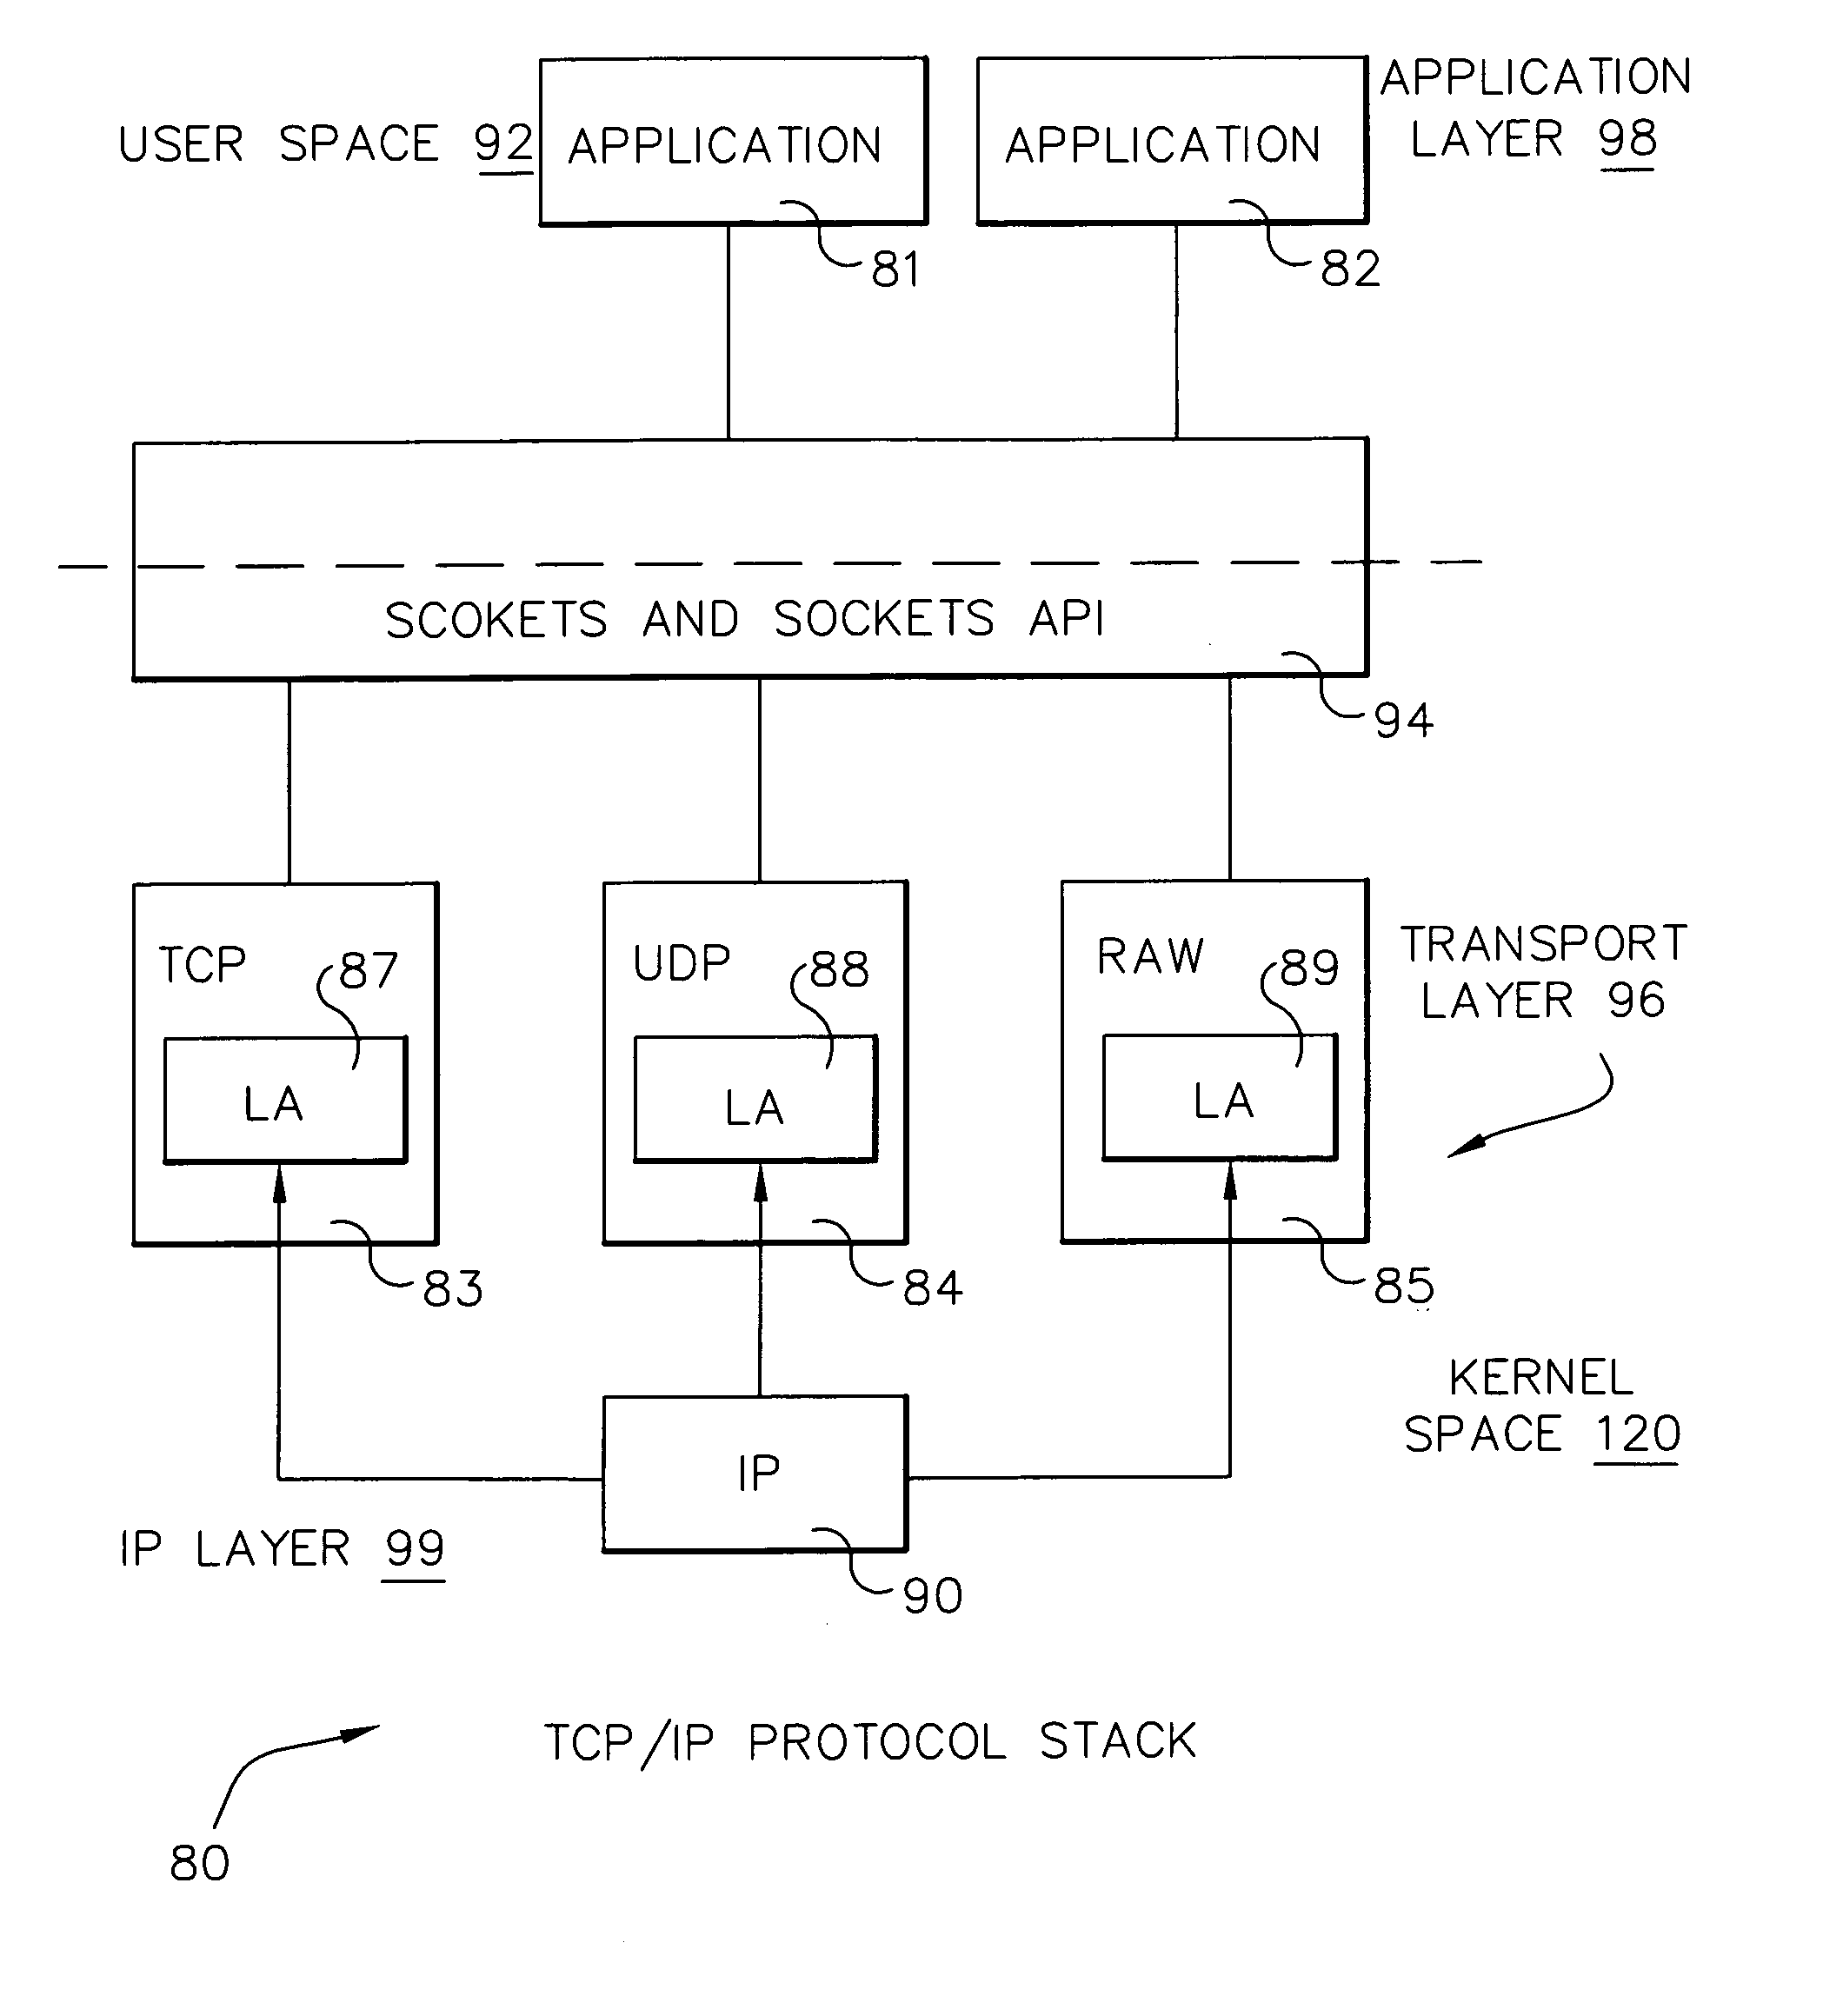 System and method for IP packet filtering based on non-IP packet traffic attributes